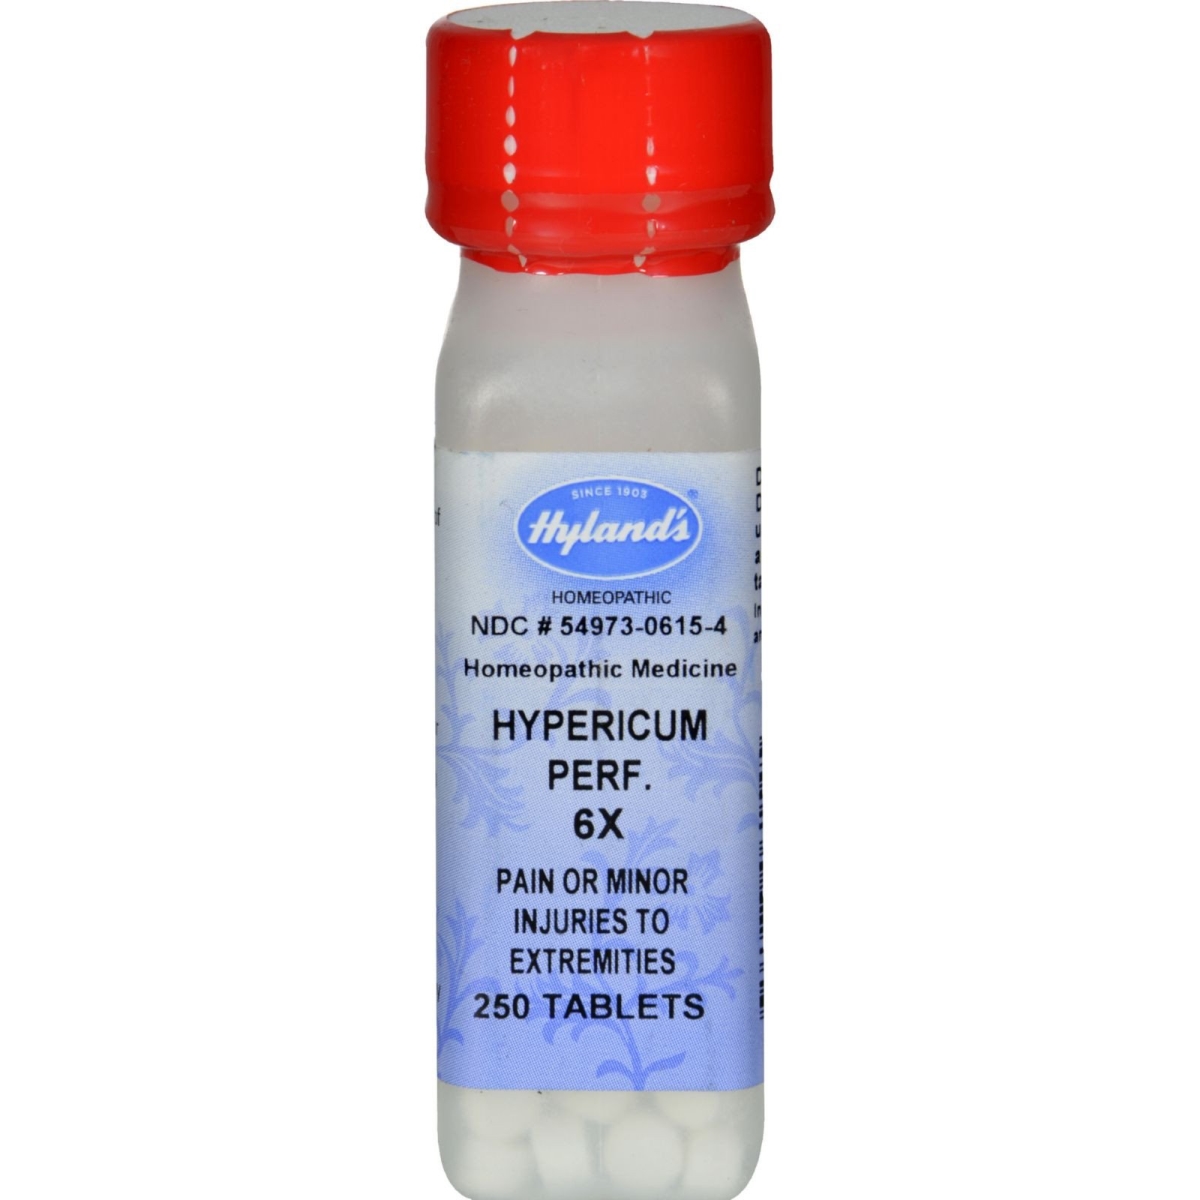 Hg0779165 Homeopathic Hypericum Perf 6x - 250 Tablets